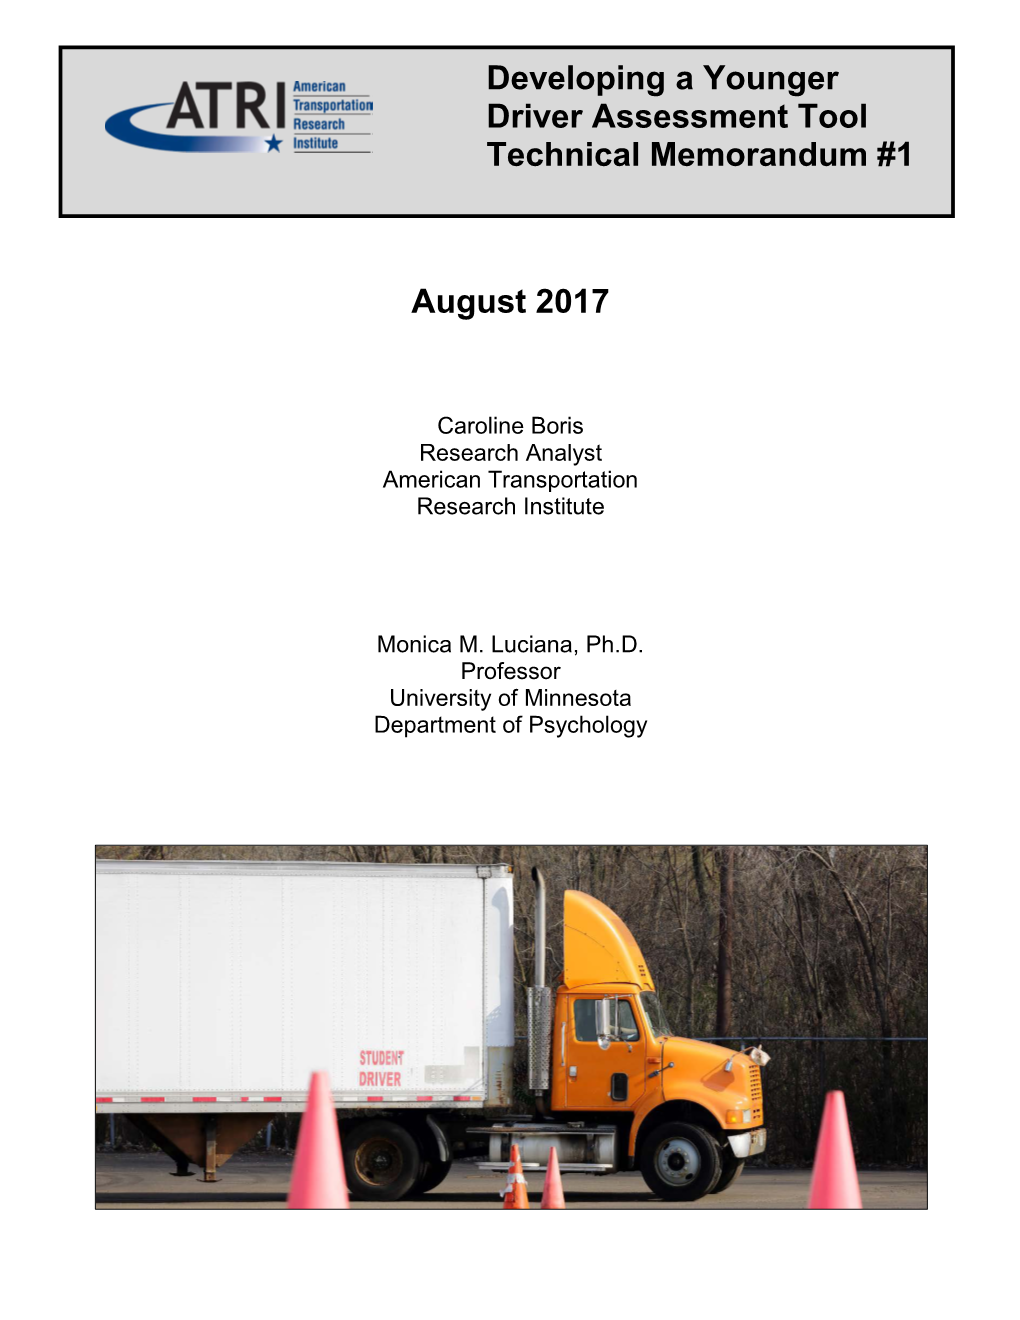 August 2017 Developing a Younger Driver Assessment Tool Technical